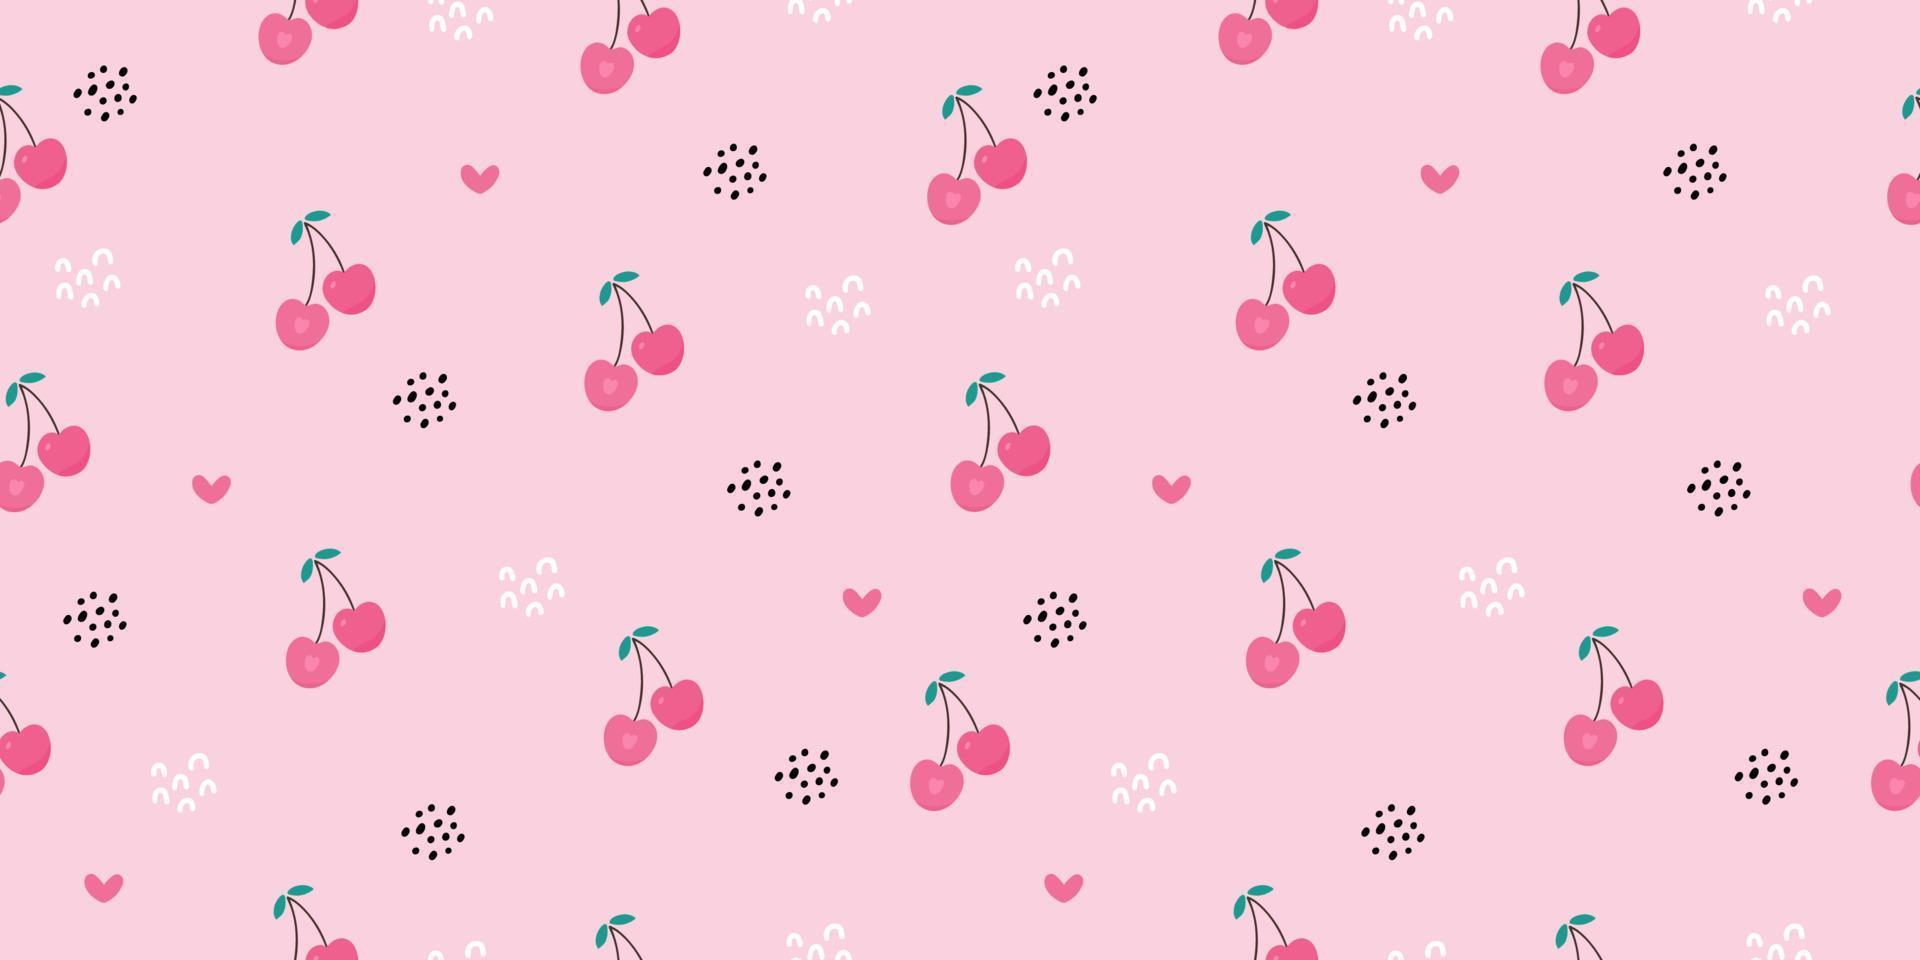 Seamless pattern of cherry fruit with green leaves, dots and hearts. Vector illustration. Cute cartoon fruit pattern, design for print, wrapping paper, packaging, web, fabric, textile, fruit shops